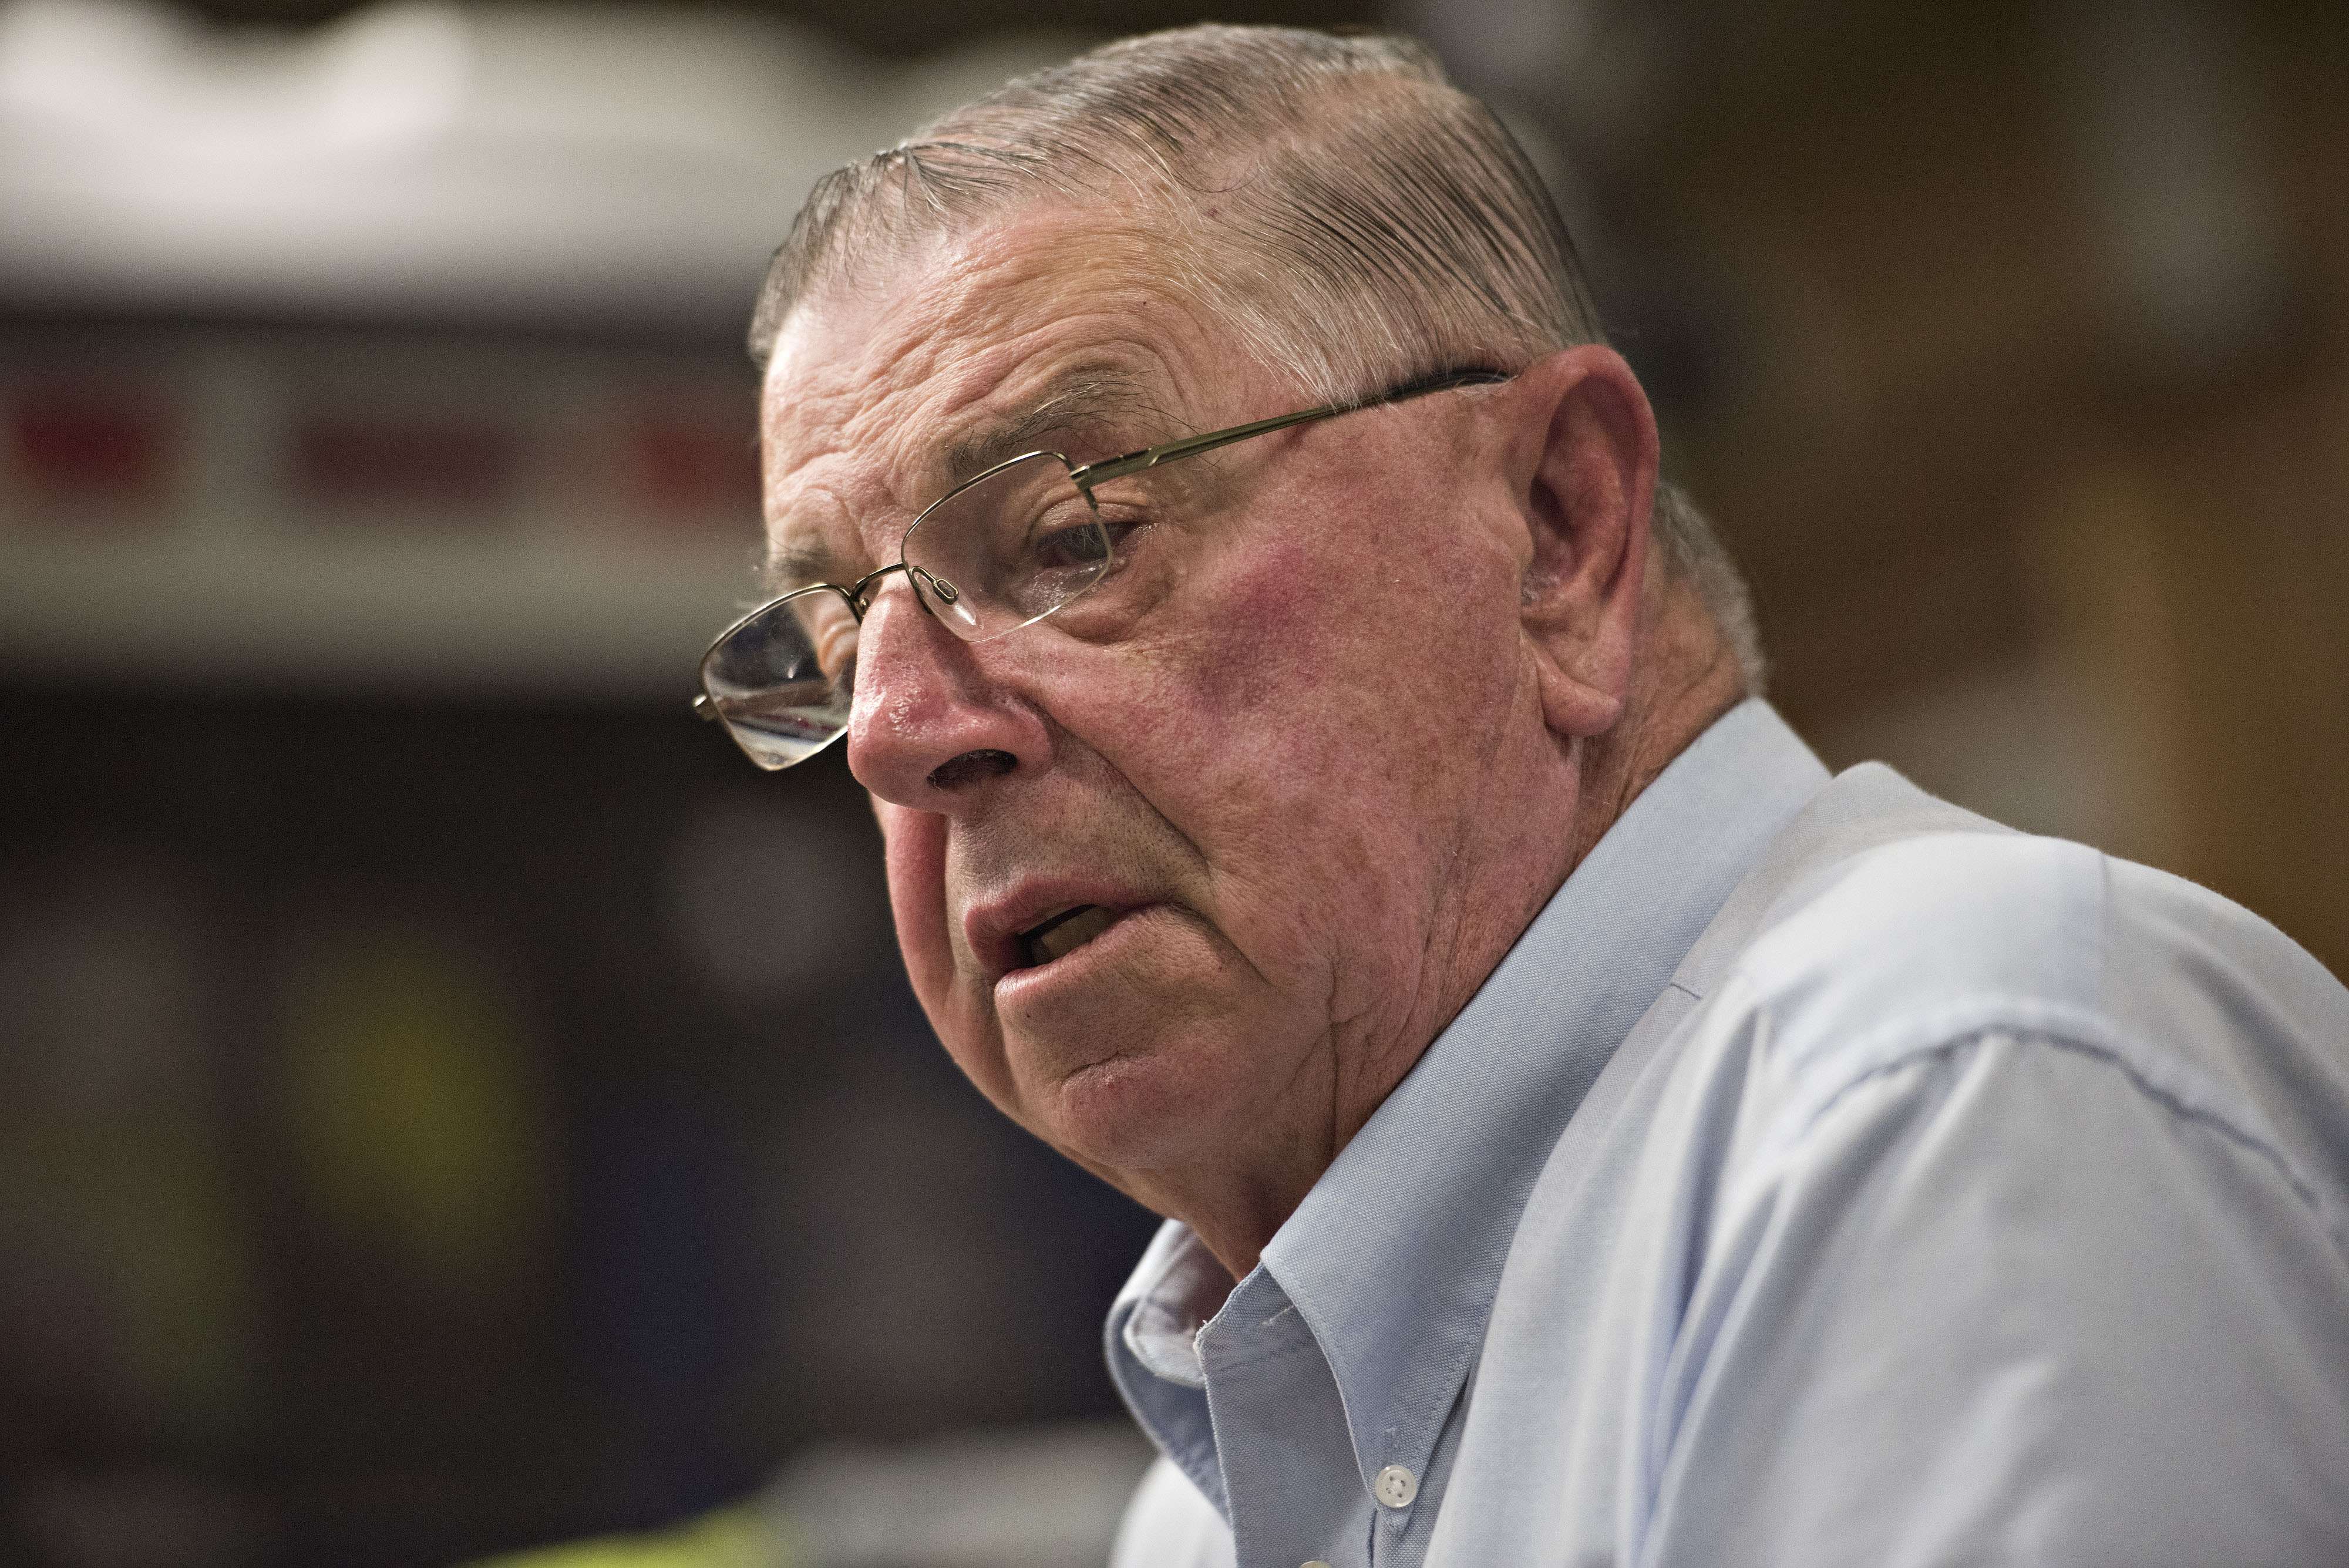 Henry Rayhons, an Iowa state legislator, speaks during an Oct. 8 interview in Garner, Iowa. Rayhons was at the time awaiting trial on a felony charge that he raped his wife, Donna Young, at a nursing home where she was living. (Daniel Acker/Bloomberg News)